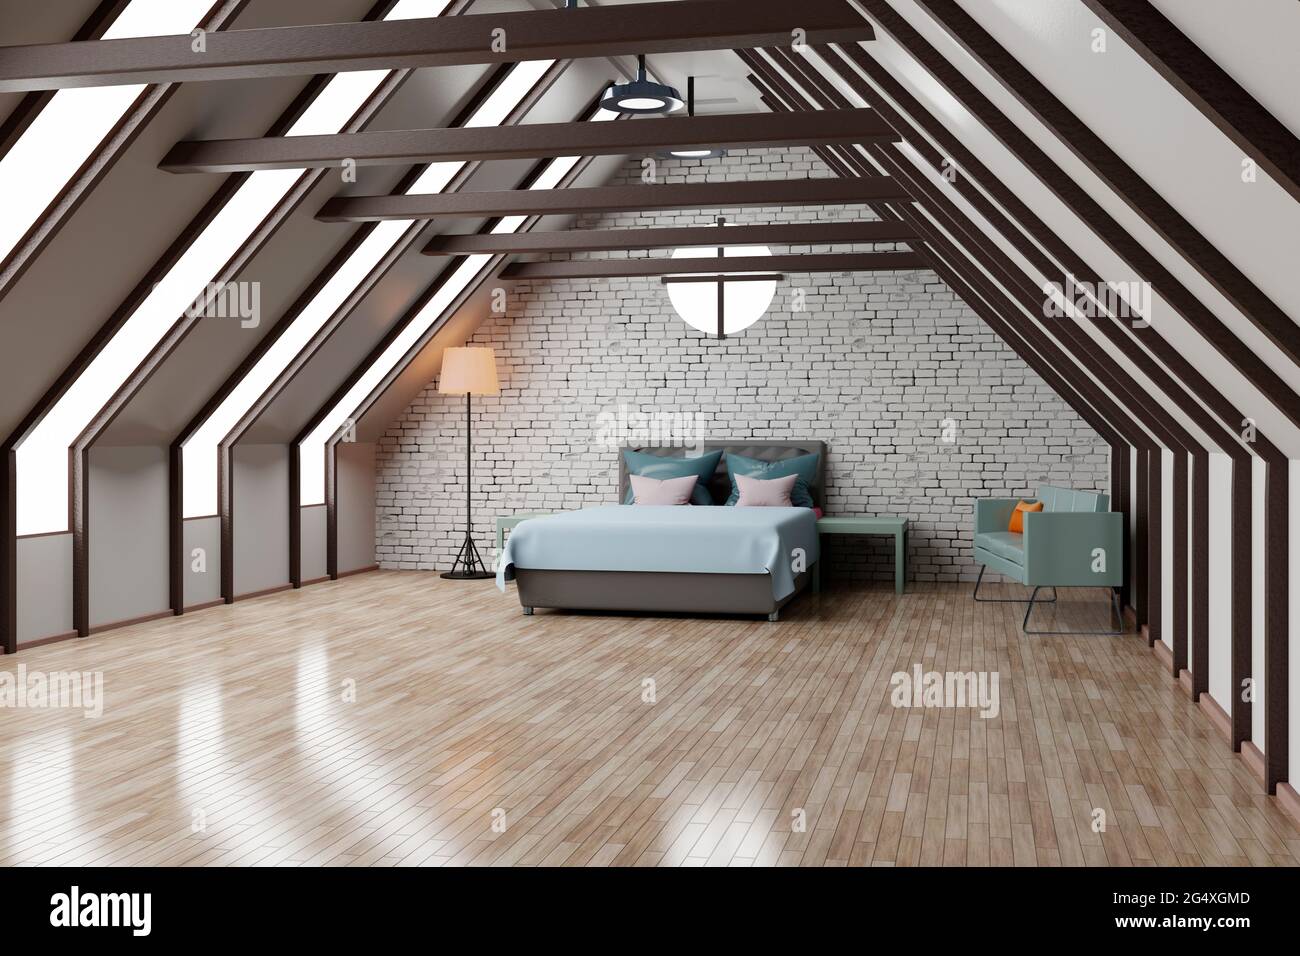 Three dimensional render of attic bedroom with shiny wooden floor Stock Photo